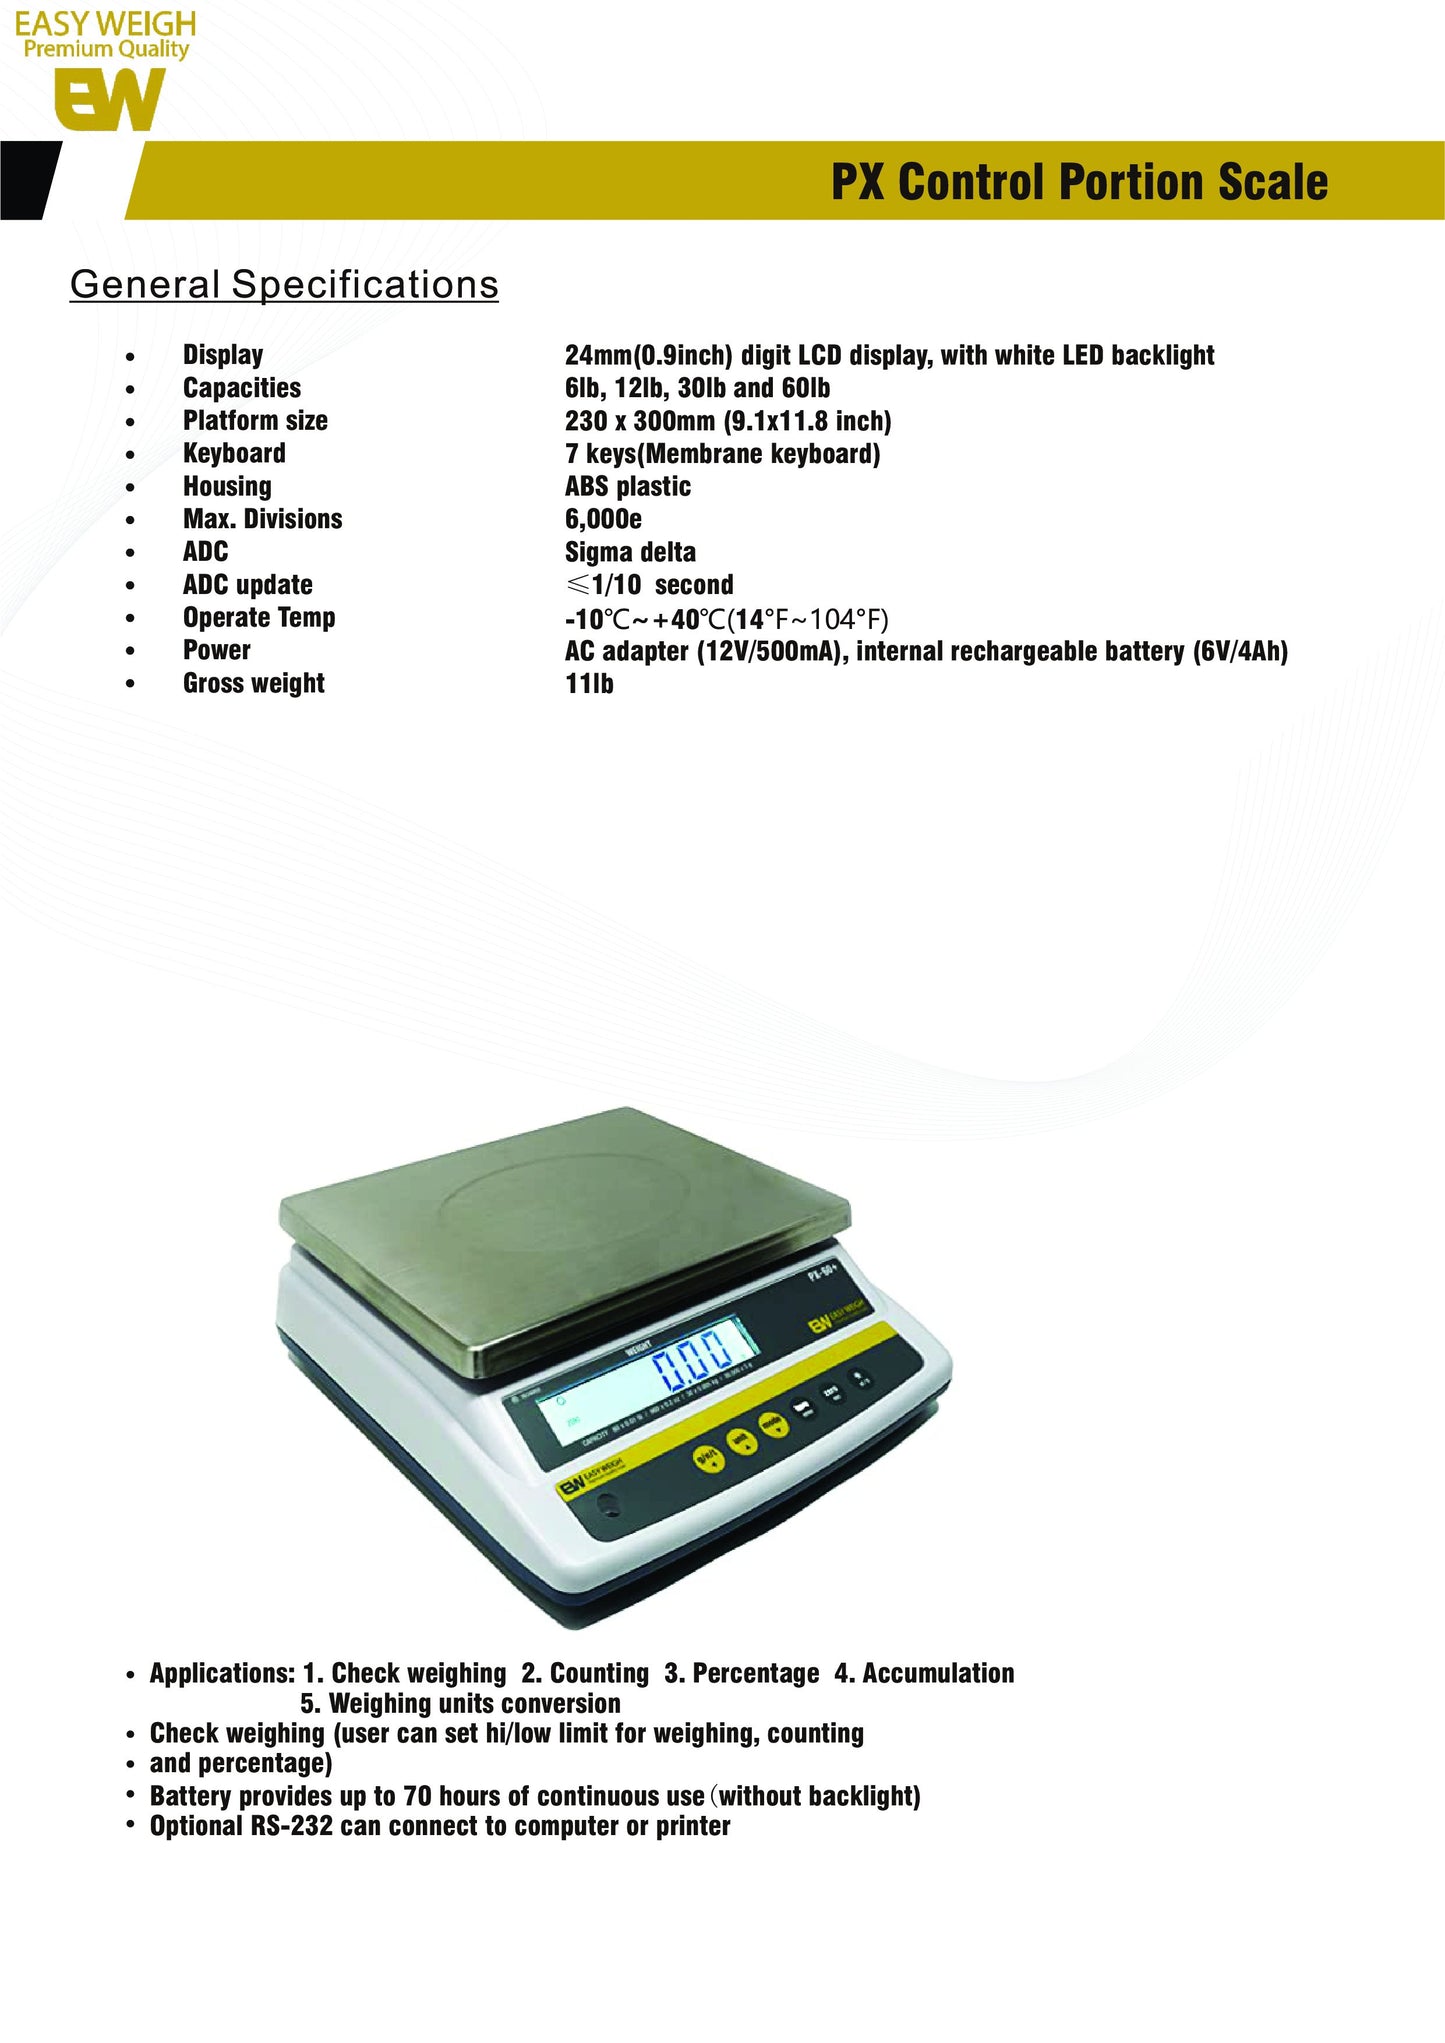 Easy Weigh PX Series Control Portion Series Scales